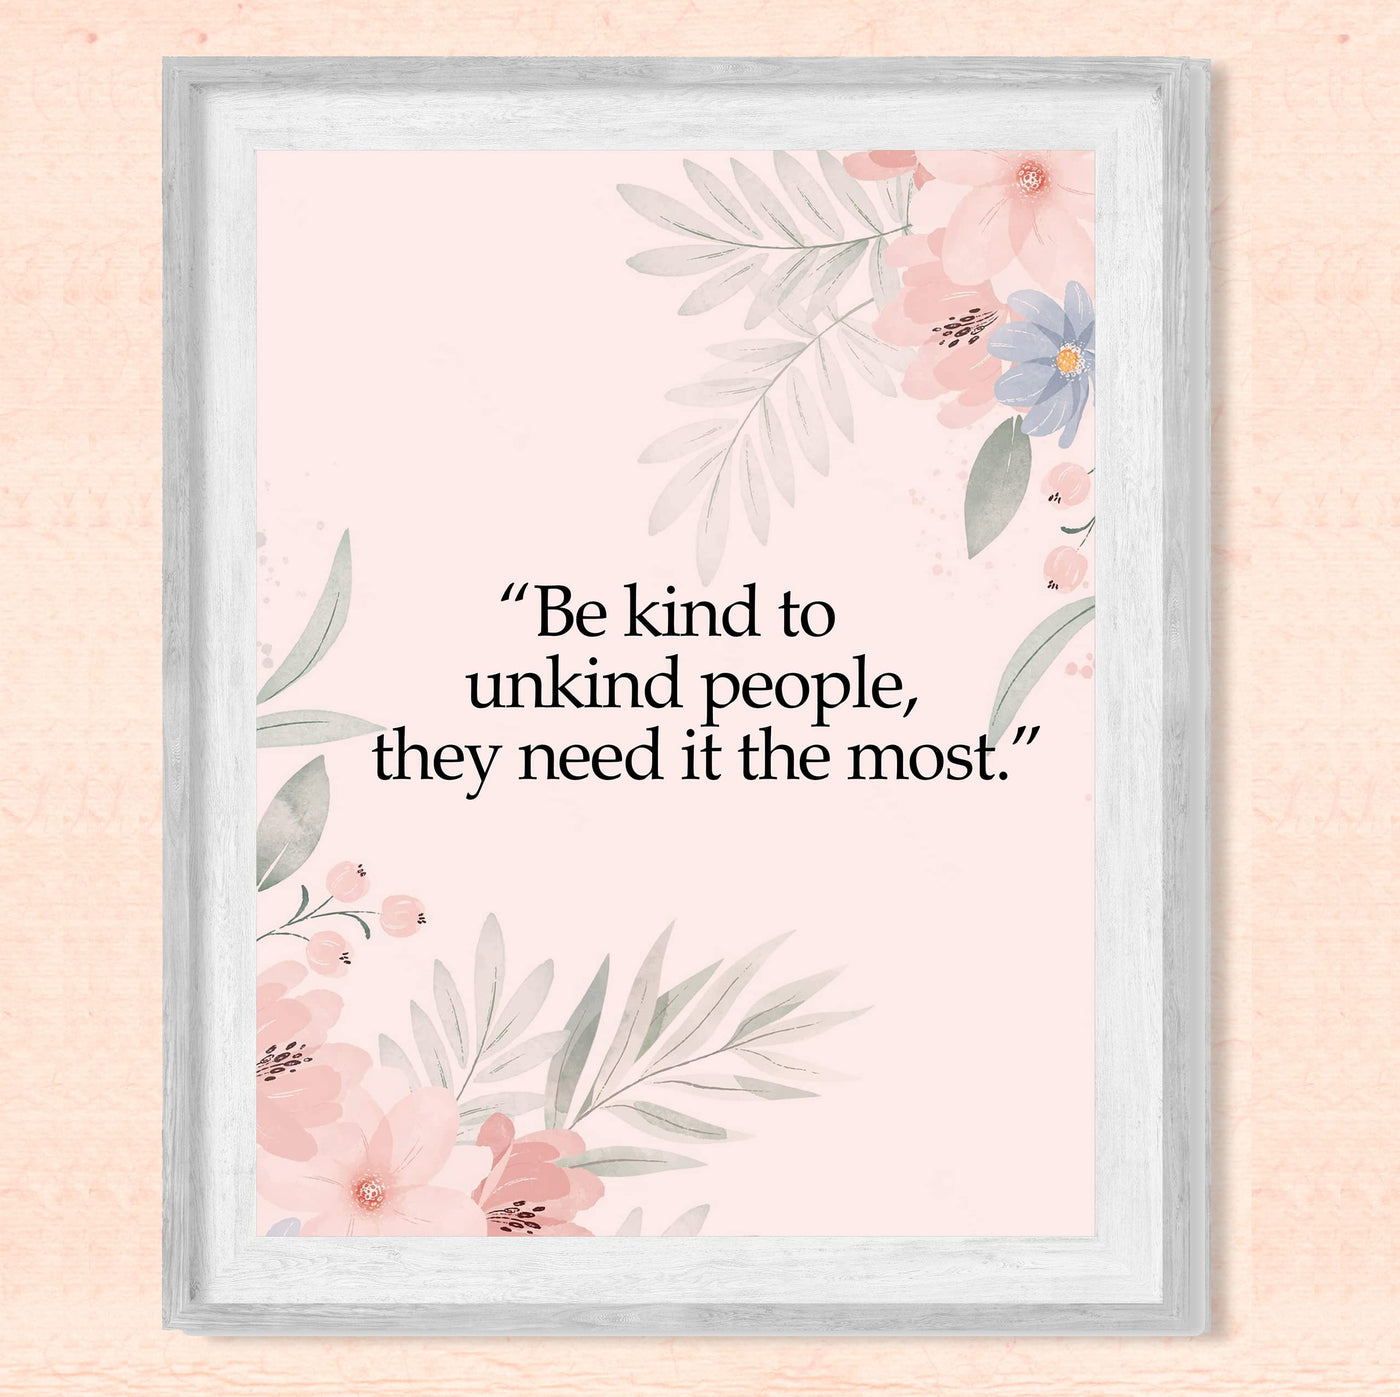 Be Kind to Unkind People Inspirational Quotes Wall Art Sign -8 x 10" Pink Floral Wall Print -Ready to Frame. Motivational Home-Office-Classroom-Library-Positive Decor. Great Gift & Reminder!